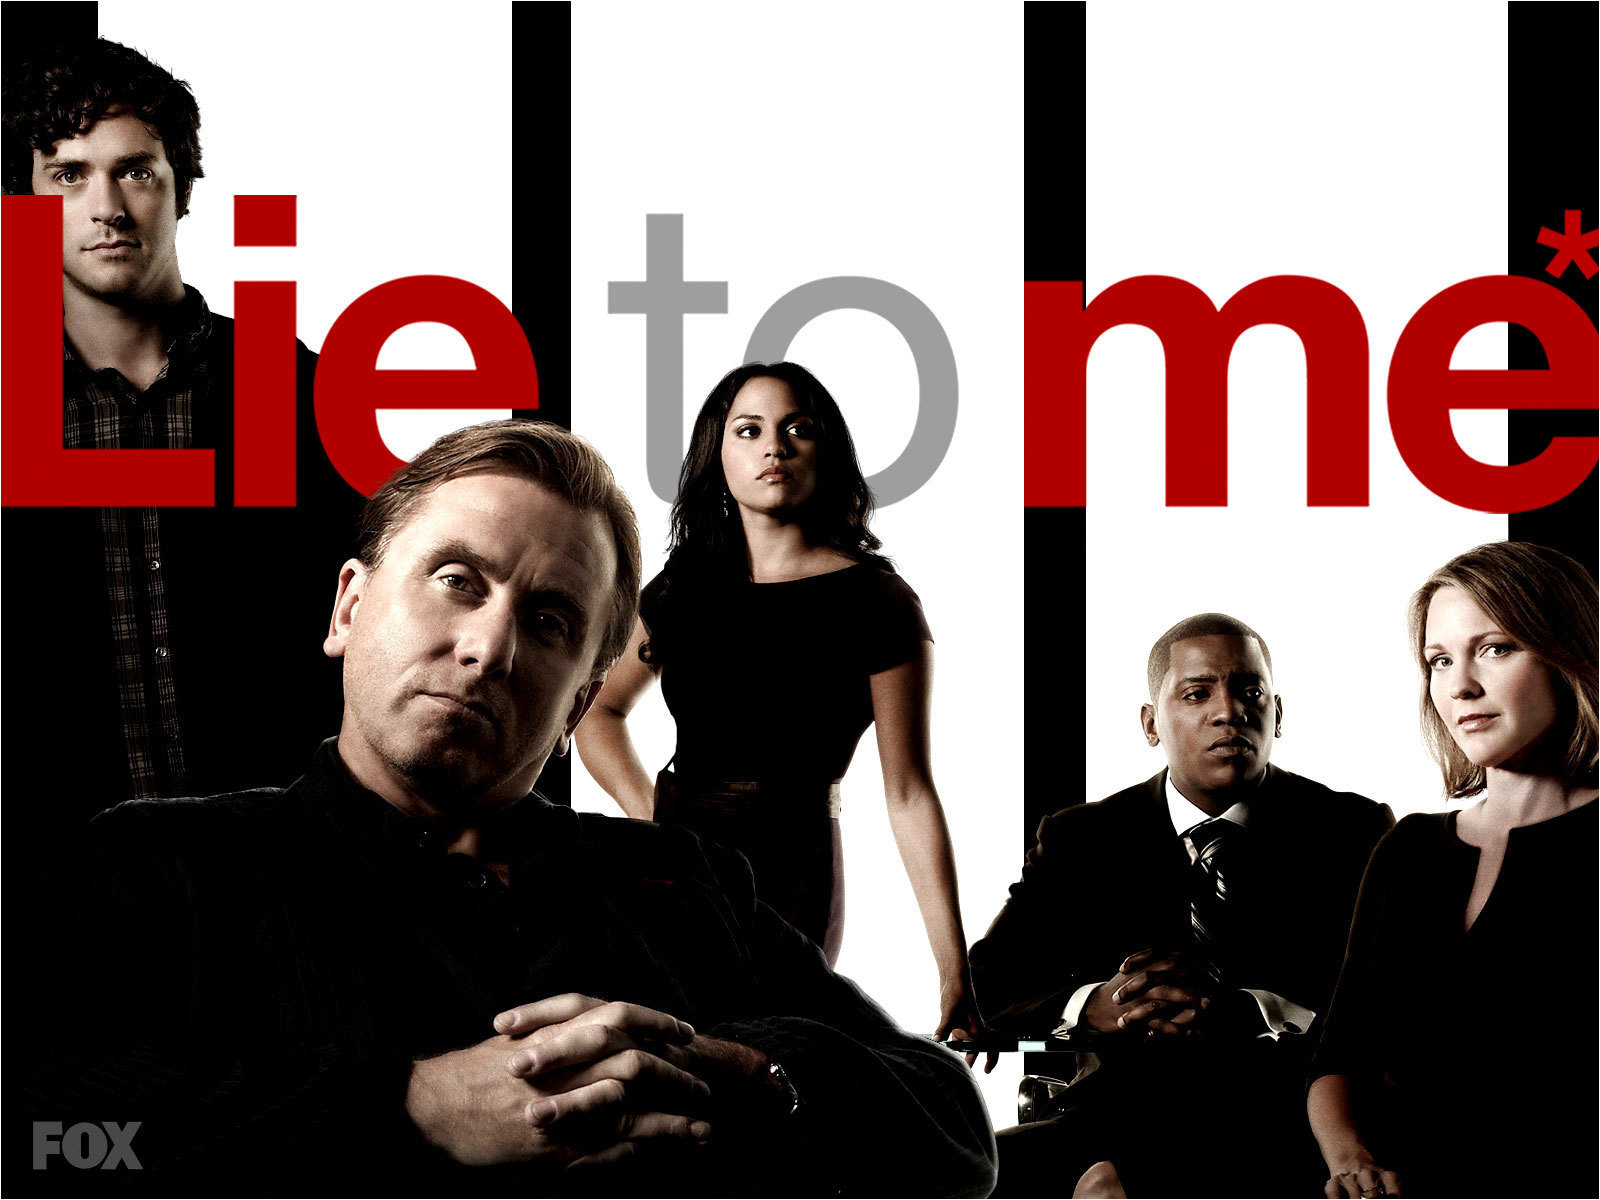 lie to me wallpaper,font,movie,musical,photography,television program